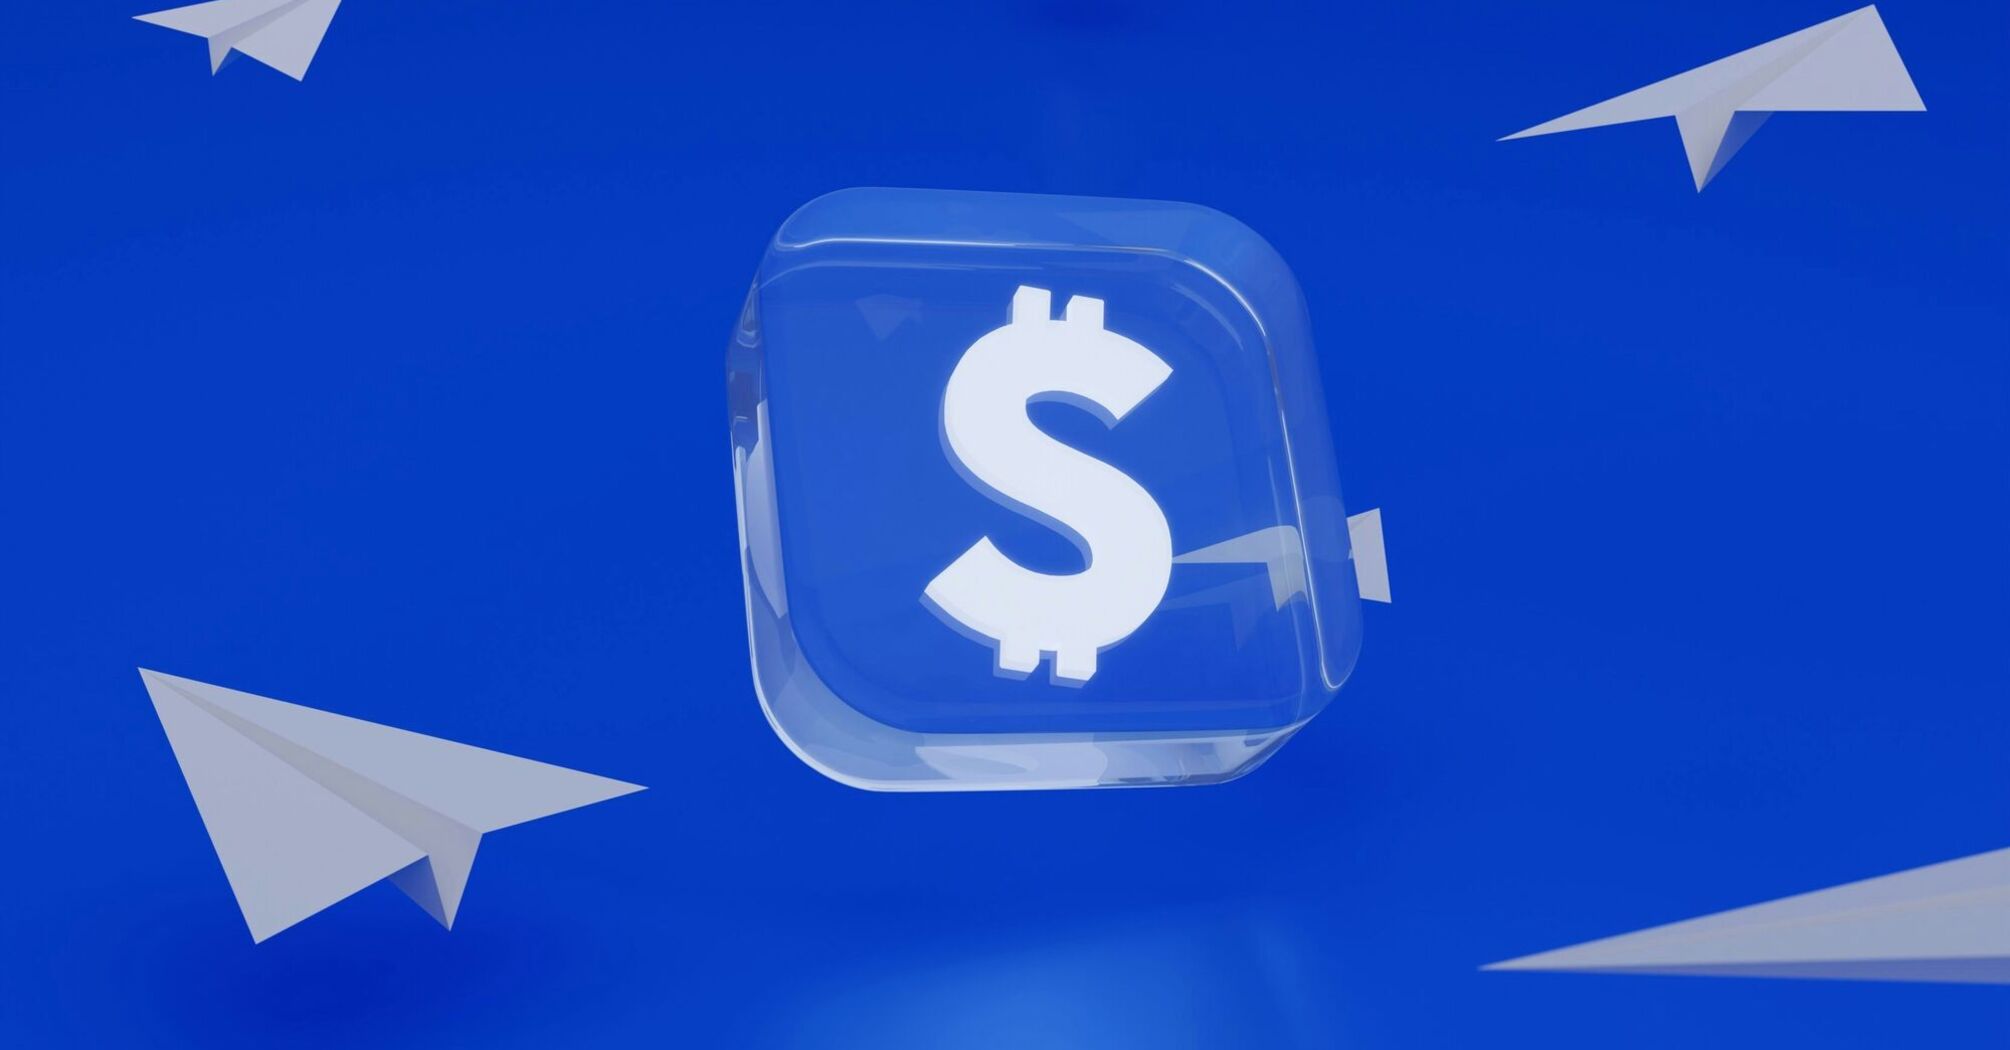 A transparent cube with a dollar sign floating against a bright blue background, surrounded by white paper airplanes